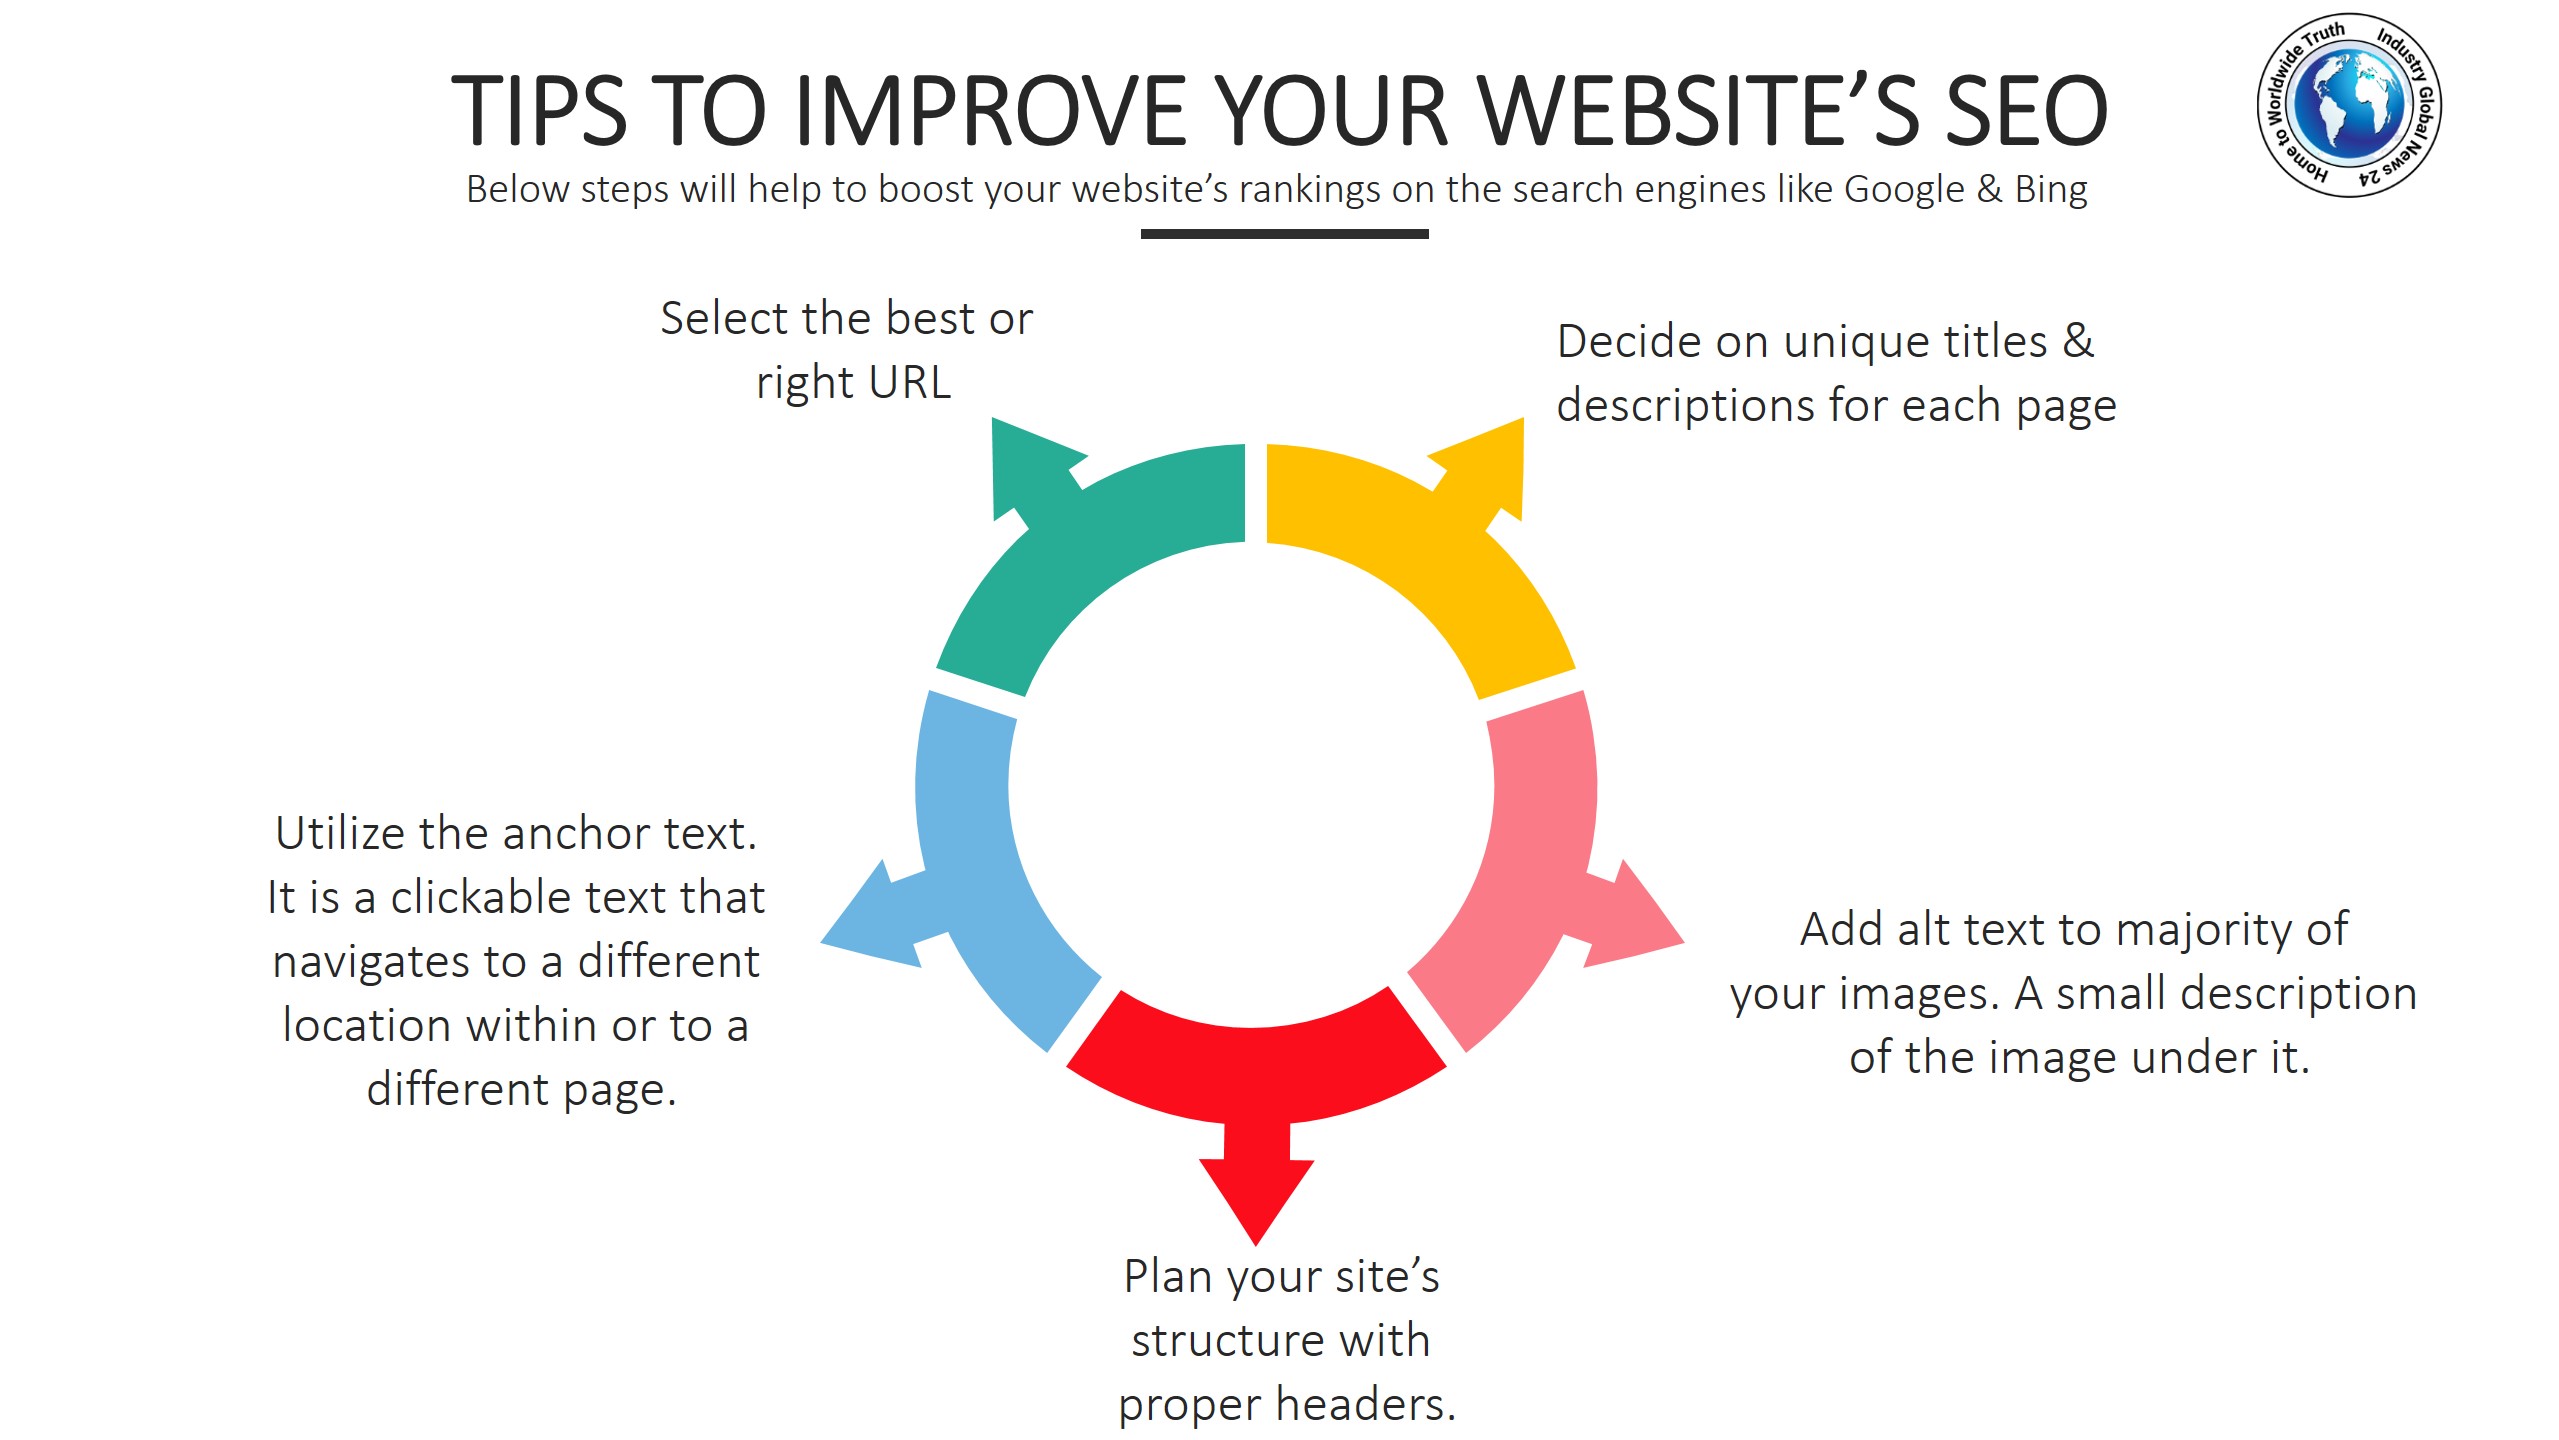 Tips to improve your website’s SEO